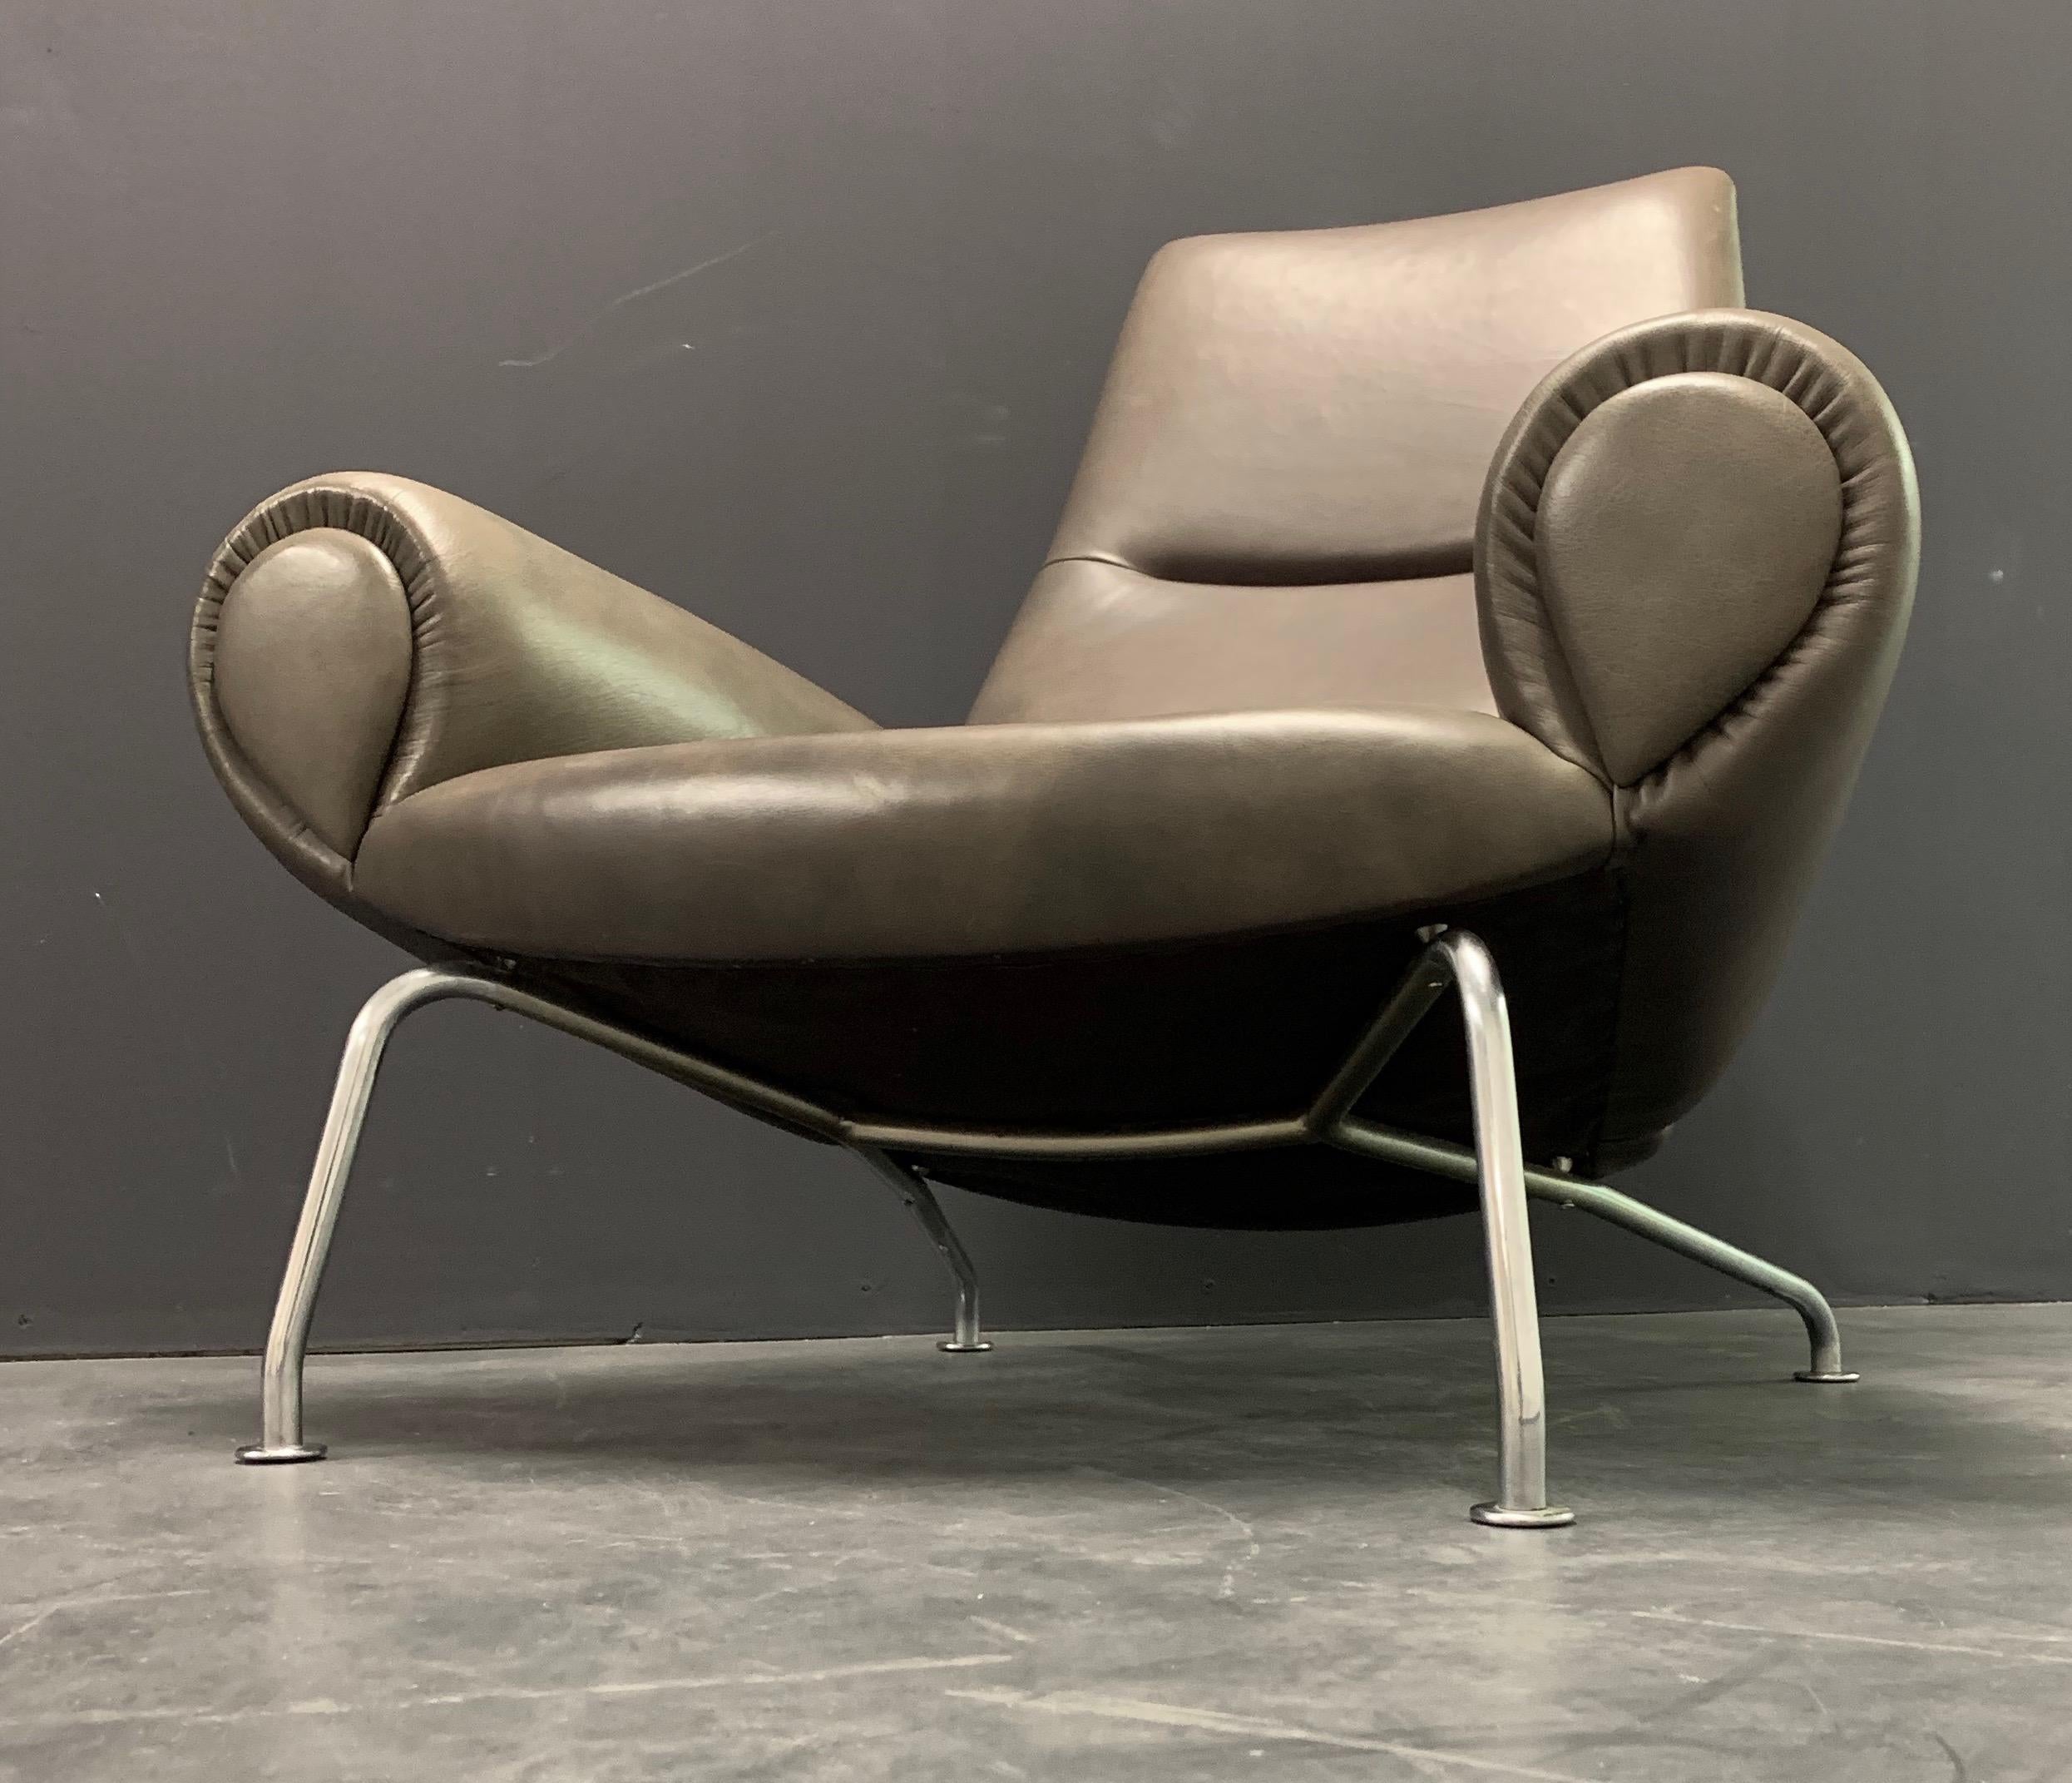 The rarer queen version of this iconic lounge chair.